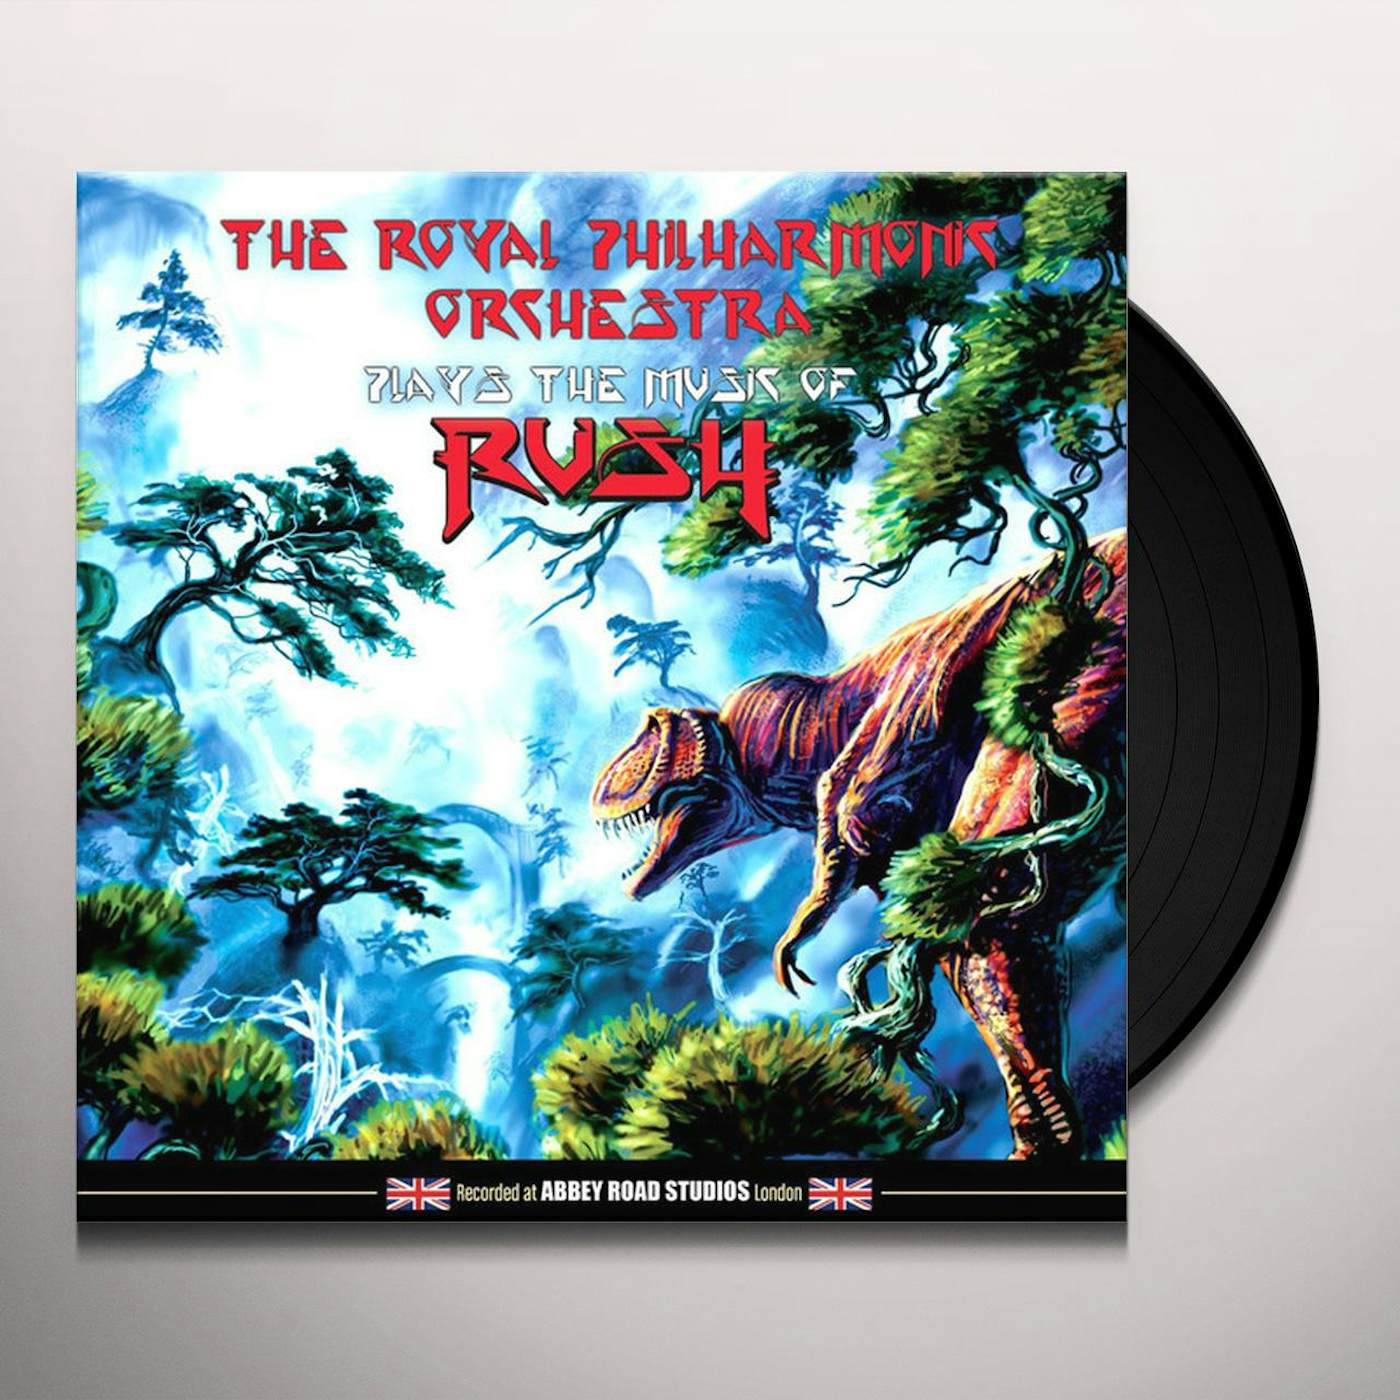 Royal Philharmonic Orchestra Plays the Music of Rush Vinyl Record